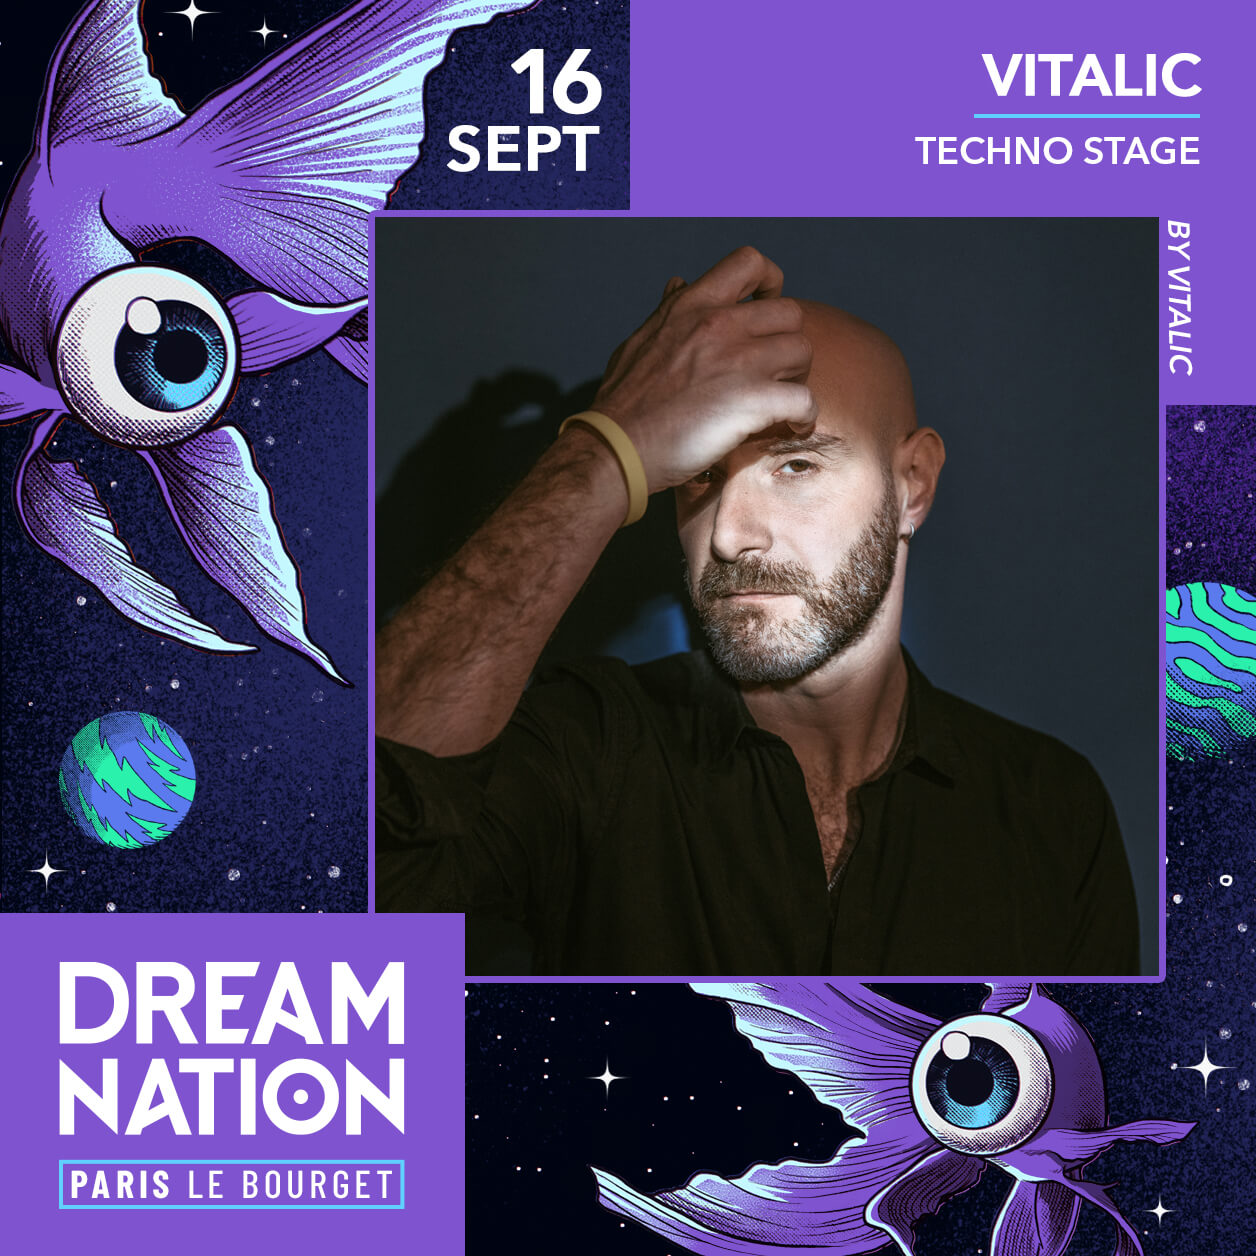 Dream Nation is welcoming Vitalic for an exceptional show !